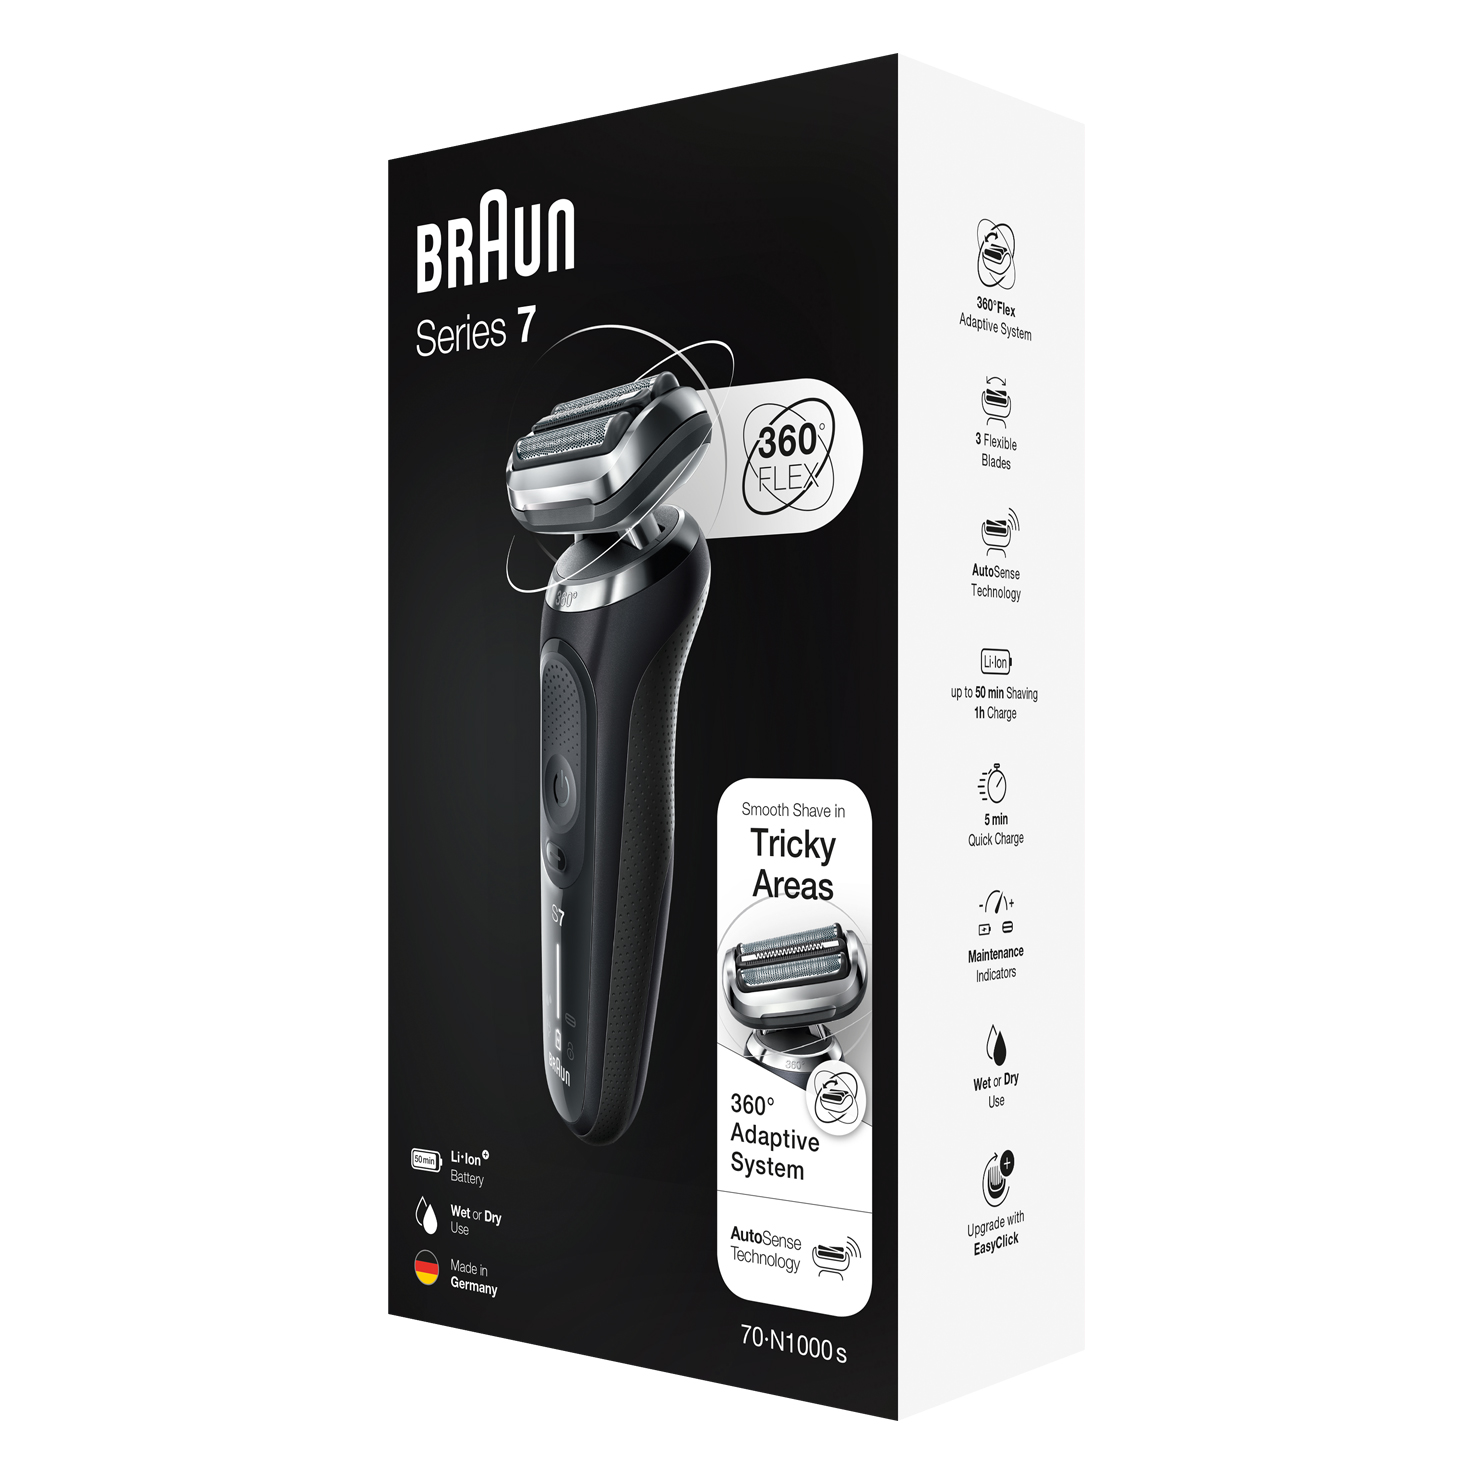 Braun Electric Shavers: Series 7 70-N1000s Wet & Dry shaver - Braun India